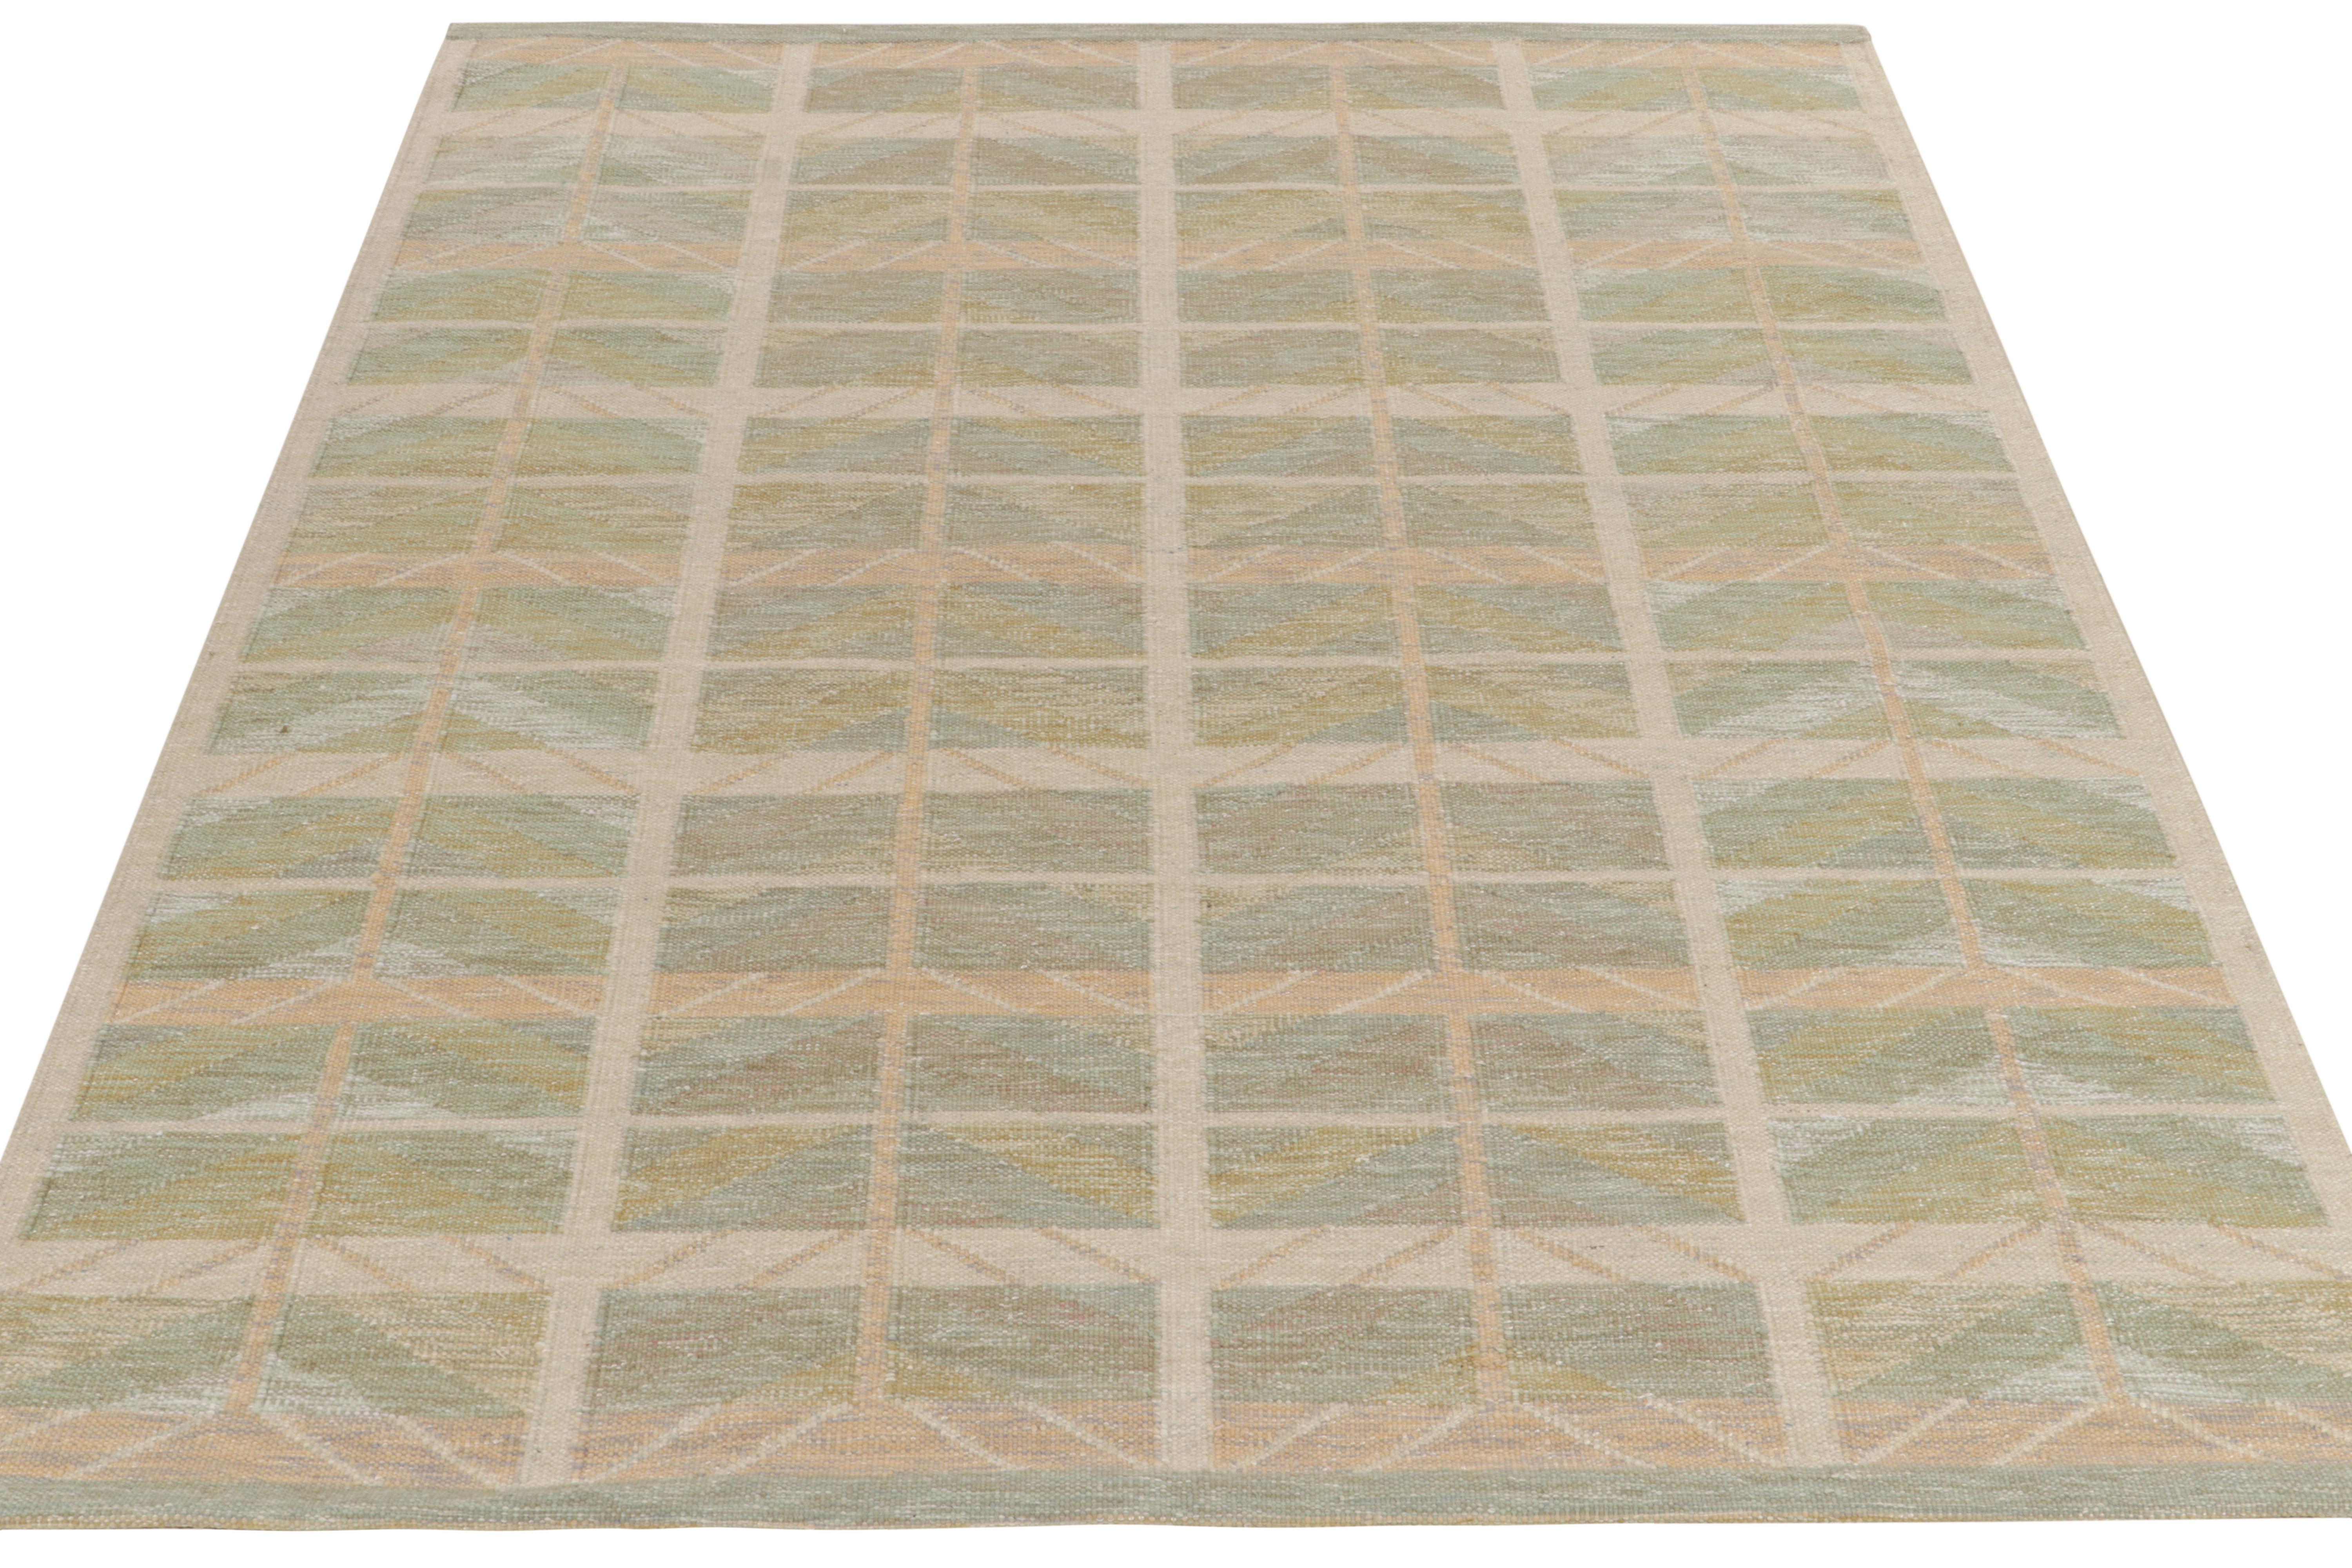 From our celebrated flatweave selections, a custom Scandinavian style kilim rug design exemplifying movement & symmetry. 

Handwoven in wool, the crisp geometric chevrons embody the smartness lent by alternating tones of super green and